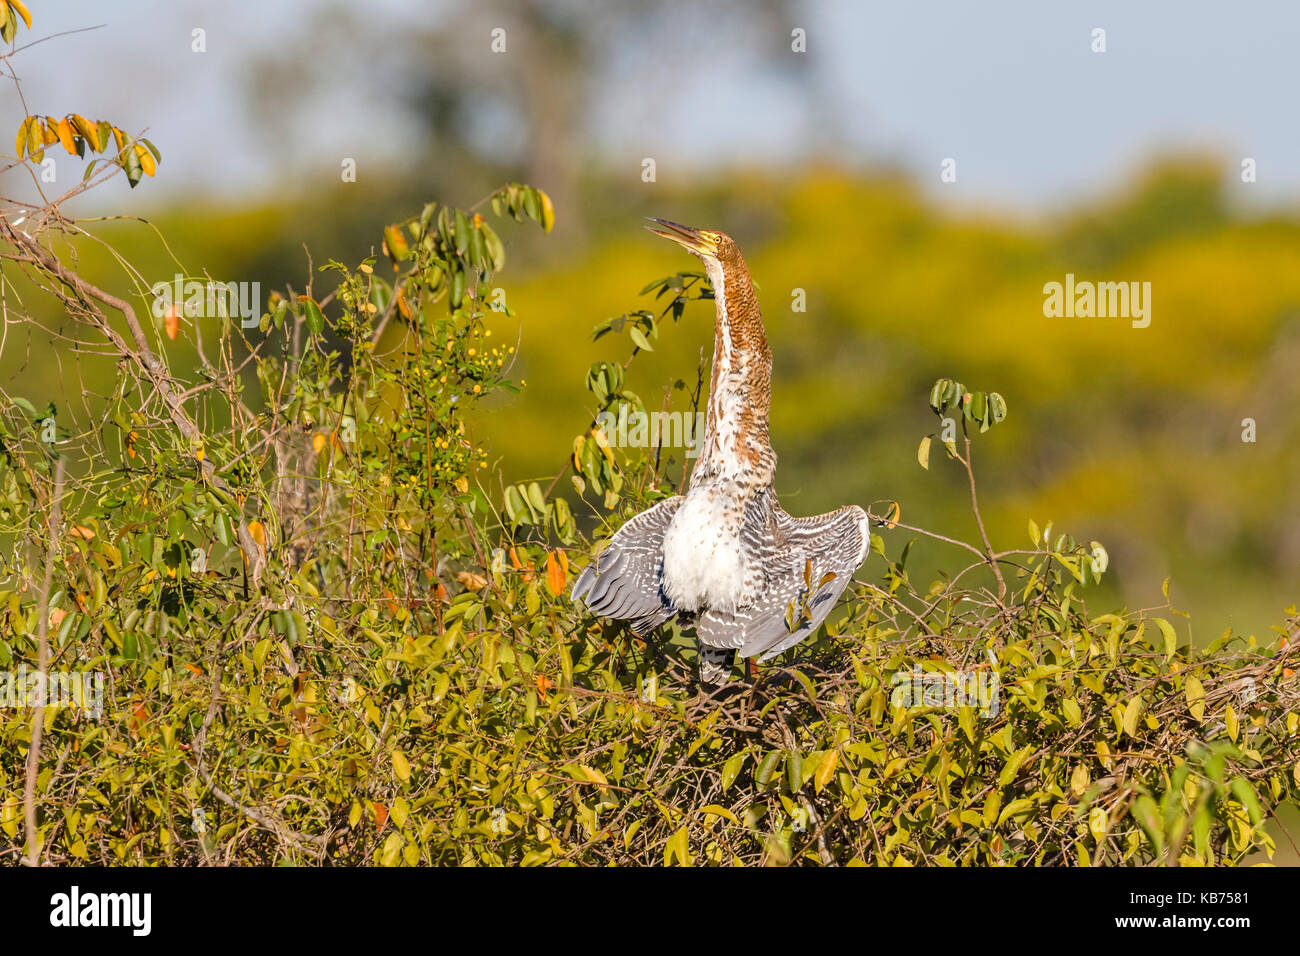 Rufescent Tiger Heron (Tigrisoma lineatum) perched on bush and basking in sun, Brazil, Mato Grosso, Pantanal Stock Photo